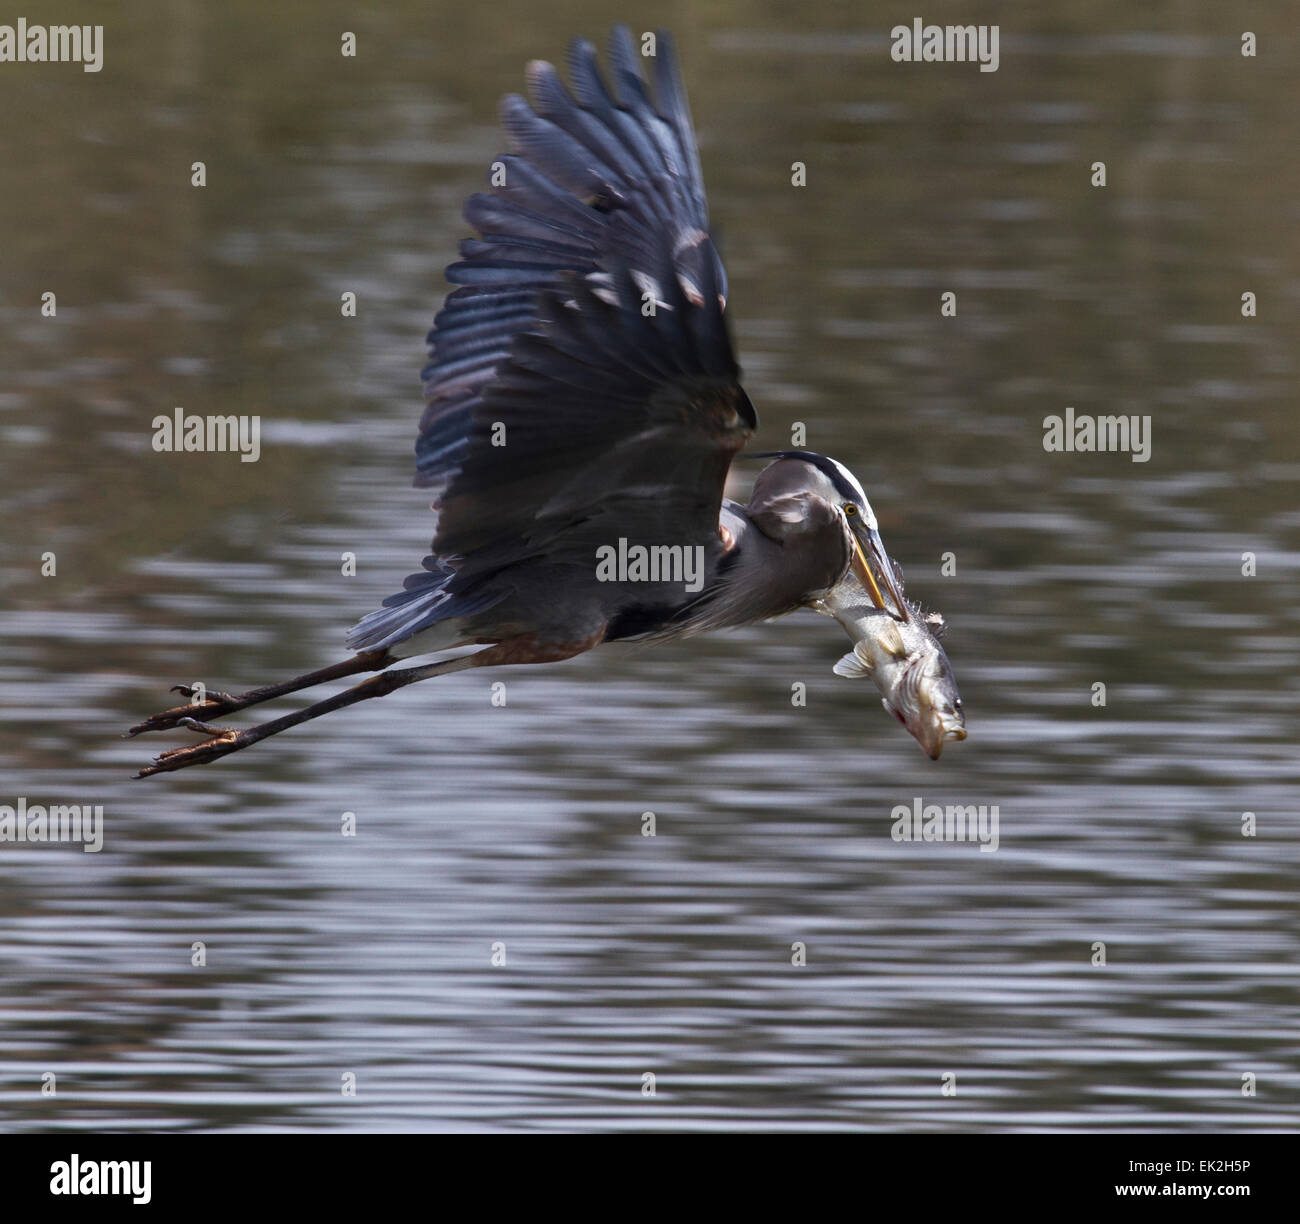 Great Blue Heron (Ardea herodias) flying with large fish it just caught Stock Photo